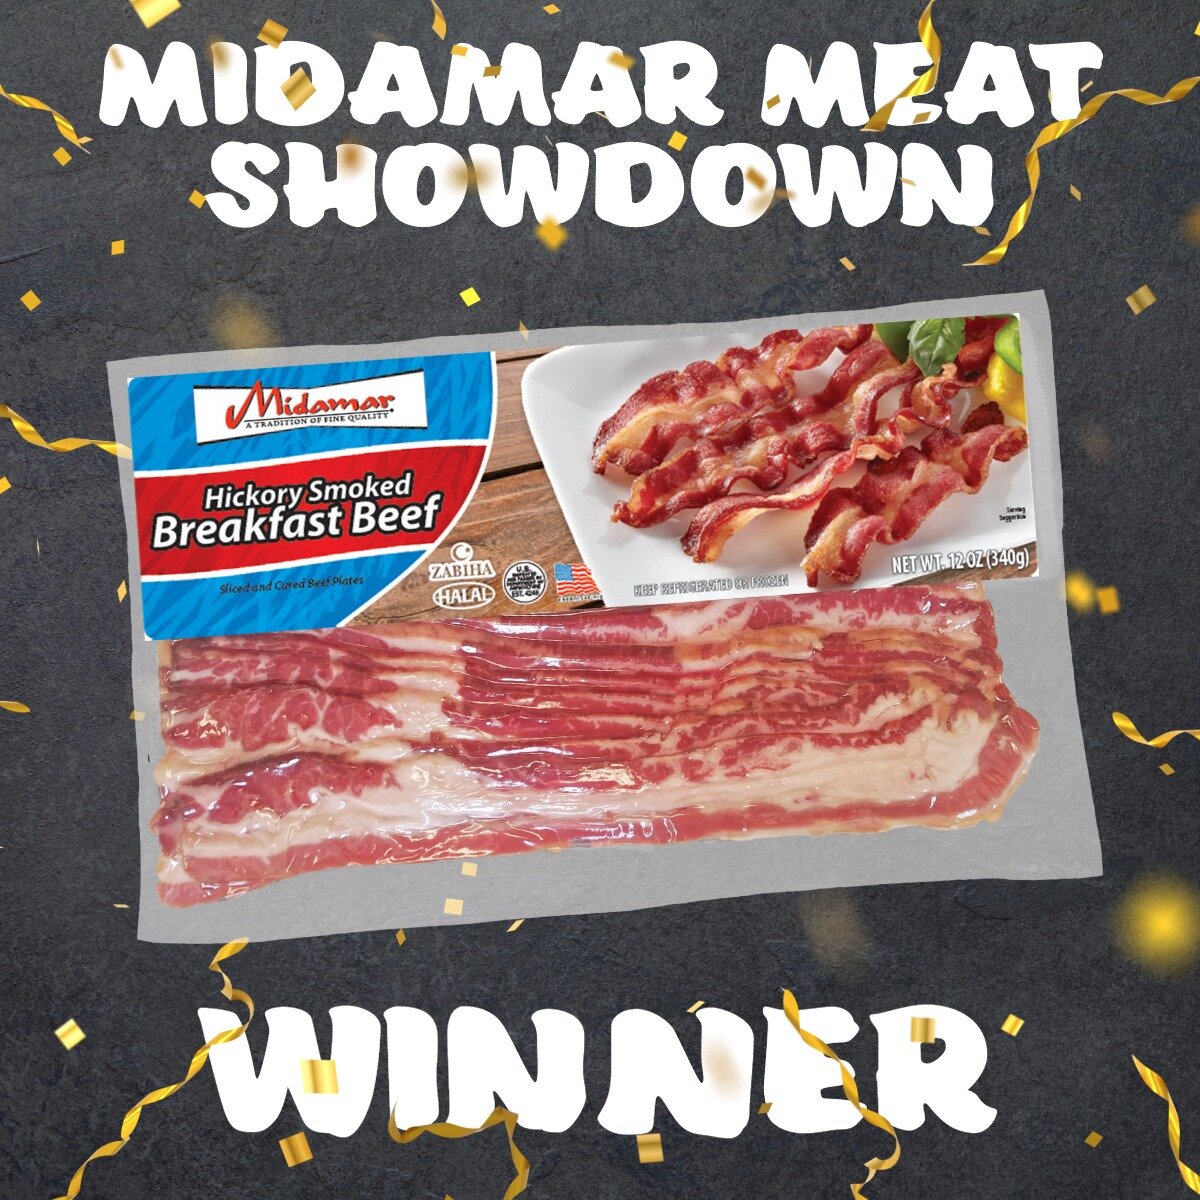 We have a champion! 🏆 Thank you to everyone who participated and voted for their favorite!

#MidamarHalal #Halal #FoodShowdown #FoodMadness